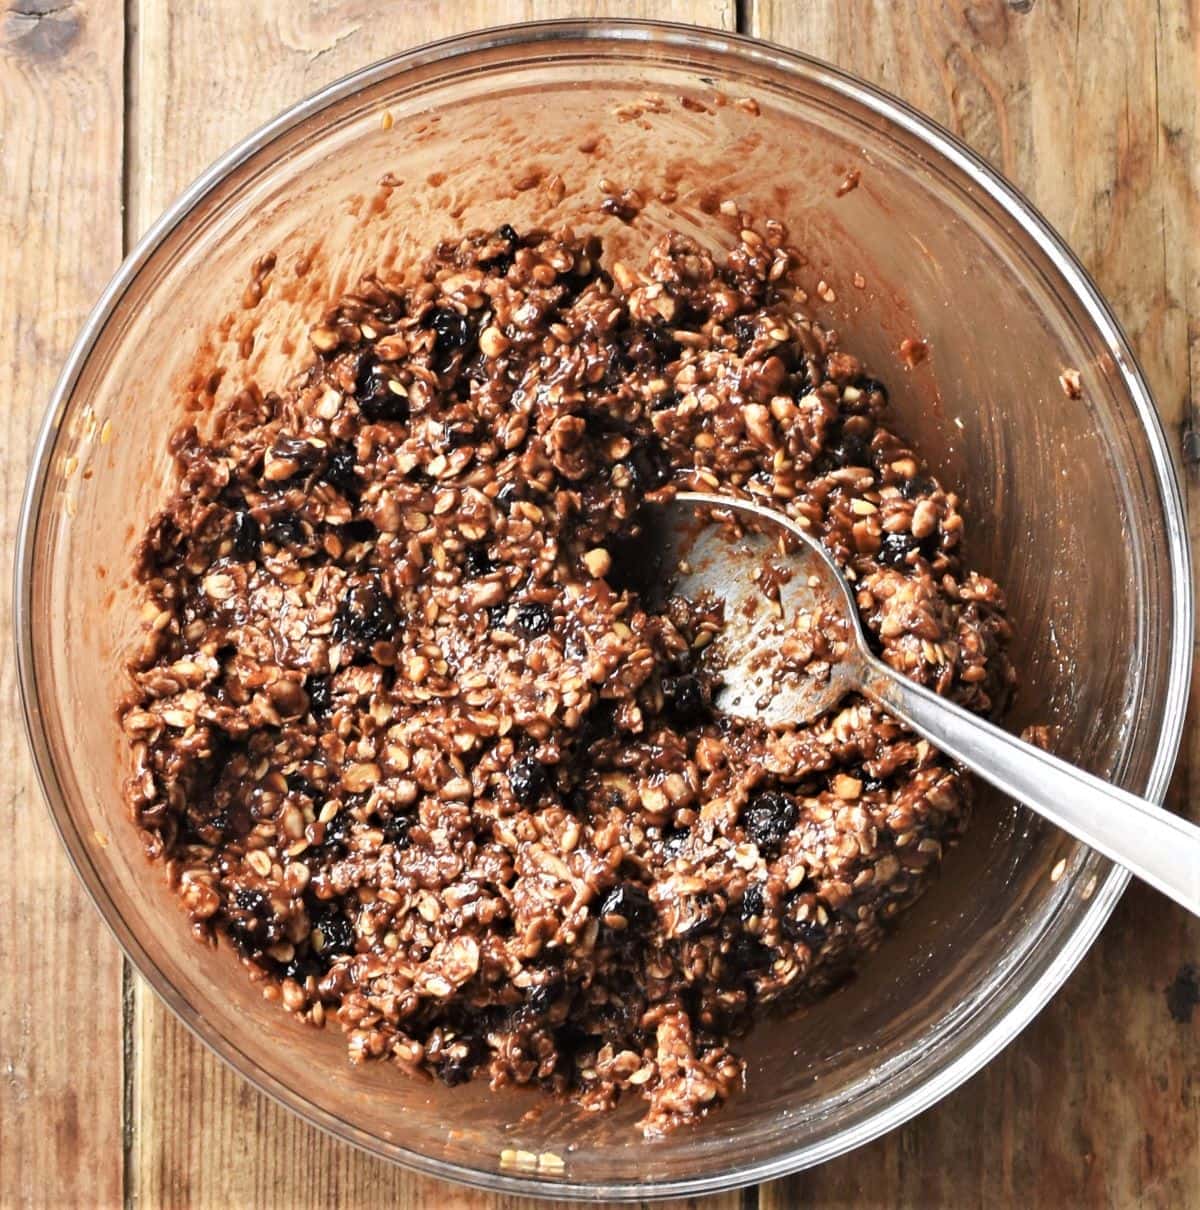 Oat, nut and chocolate mixture in bowl with spoon.